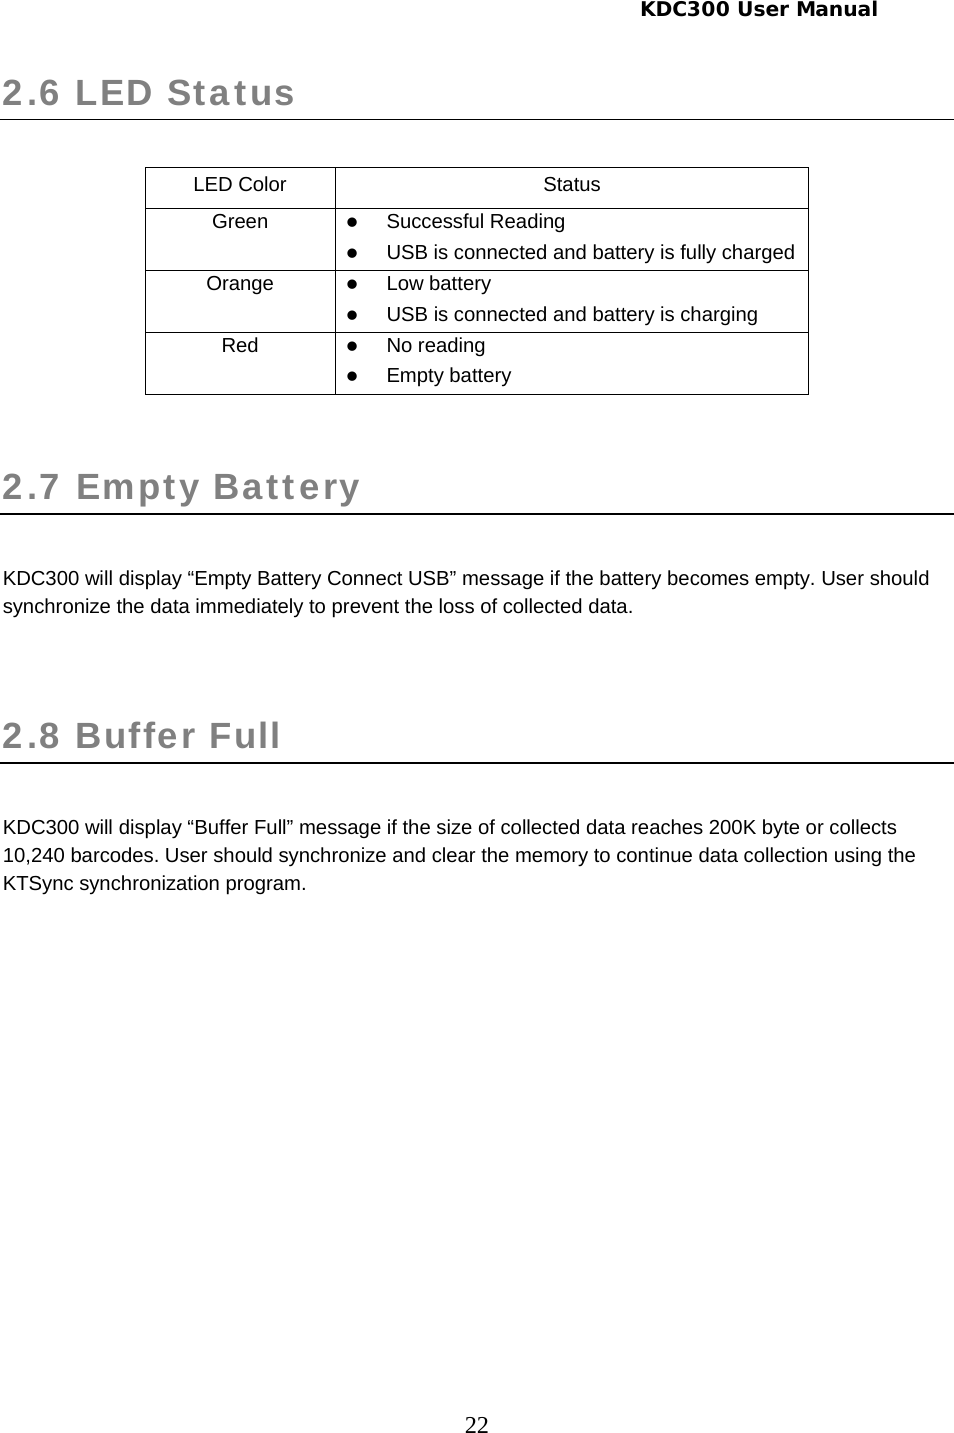     KDC300 User Manual 22 2.6 LED Status   LED Color  Status Green  z Successful Reading z USB is connected and battery is fully charged Orange  z Low battery z USB is connected and battery is charging Red  z No reading z Empty battery  2.7 Empty Battery   KDC300 will display “Empty Battery Connect USB” message if the battery becomes empty. User should synchronize the data immediately to prevent the loss of collected data.  2.8 Buffer Full   KDC300 will display “Buffer Full” message if the size of collected data reaches 200K byte or collects 10,240 barcodes. User should synchronize and clear the memory to continue data collection using the KTSync synchronization program.   